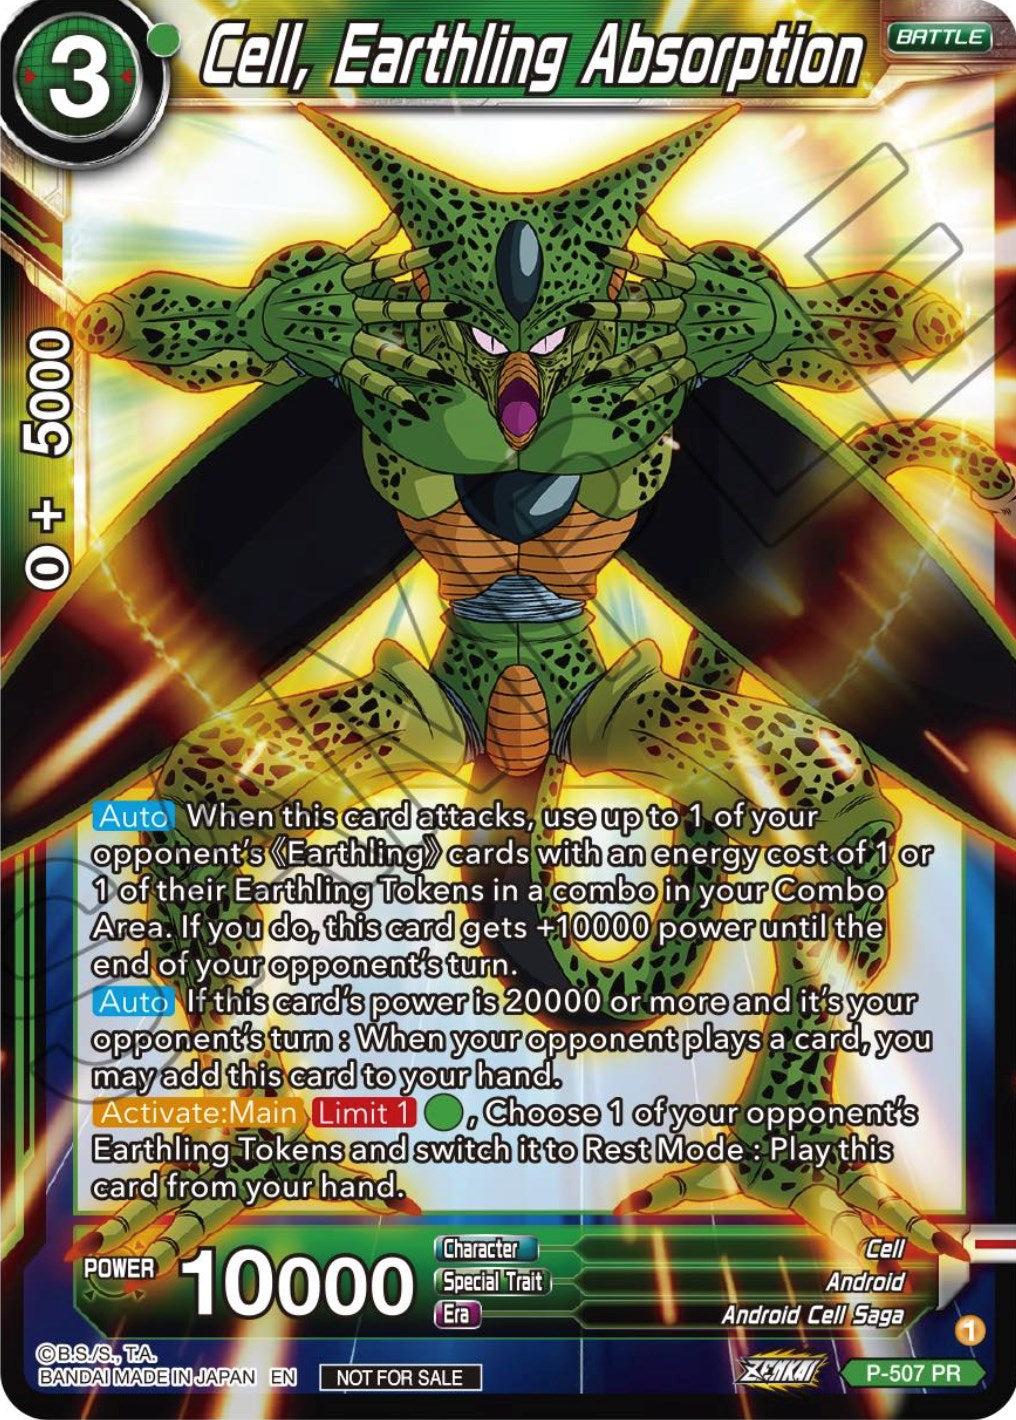 Cell, Earthling Absorption (Zenkai Series Tournament Pack Vol.4) (P-507) [Tournament Promotion Cards] | Black Swamp Games